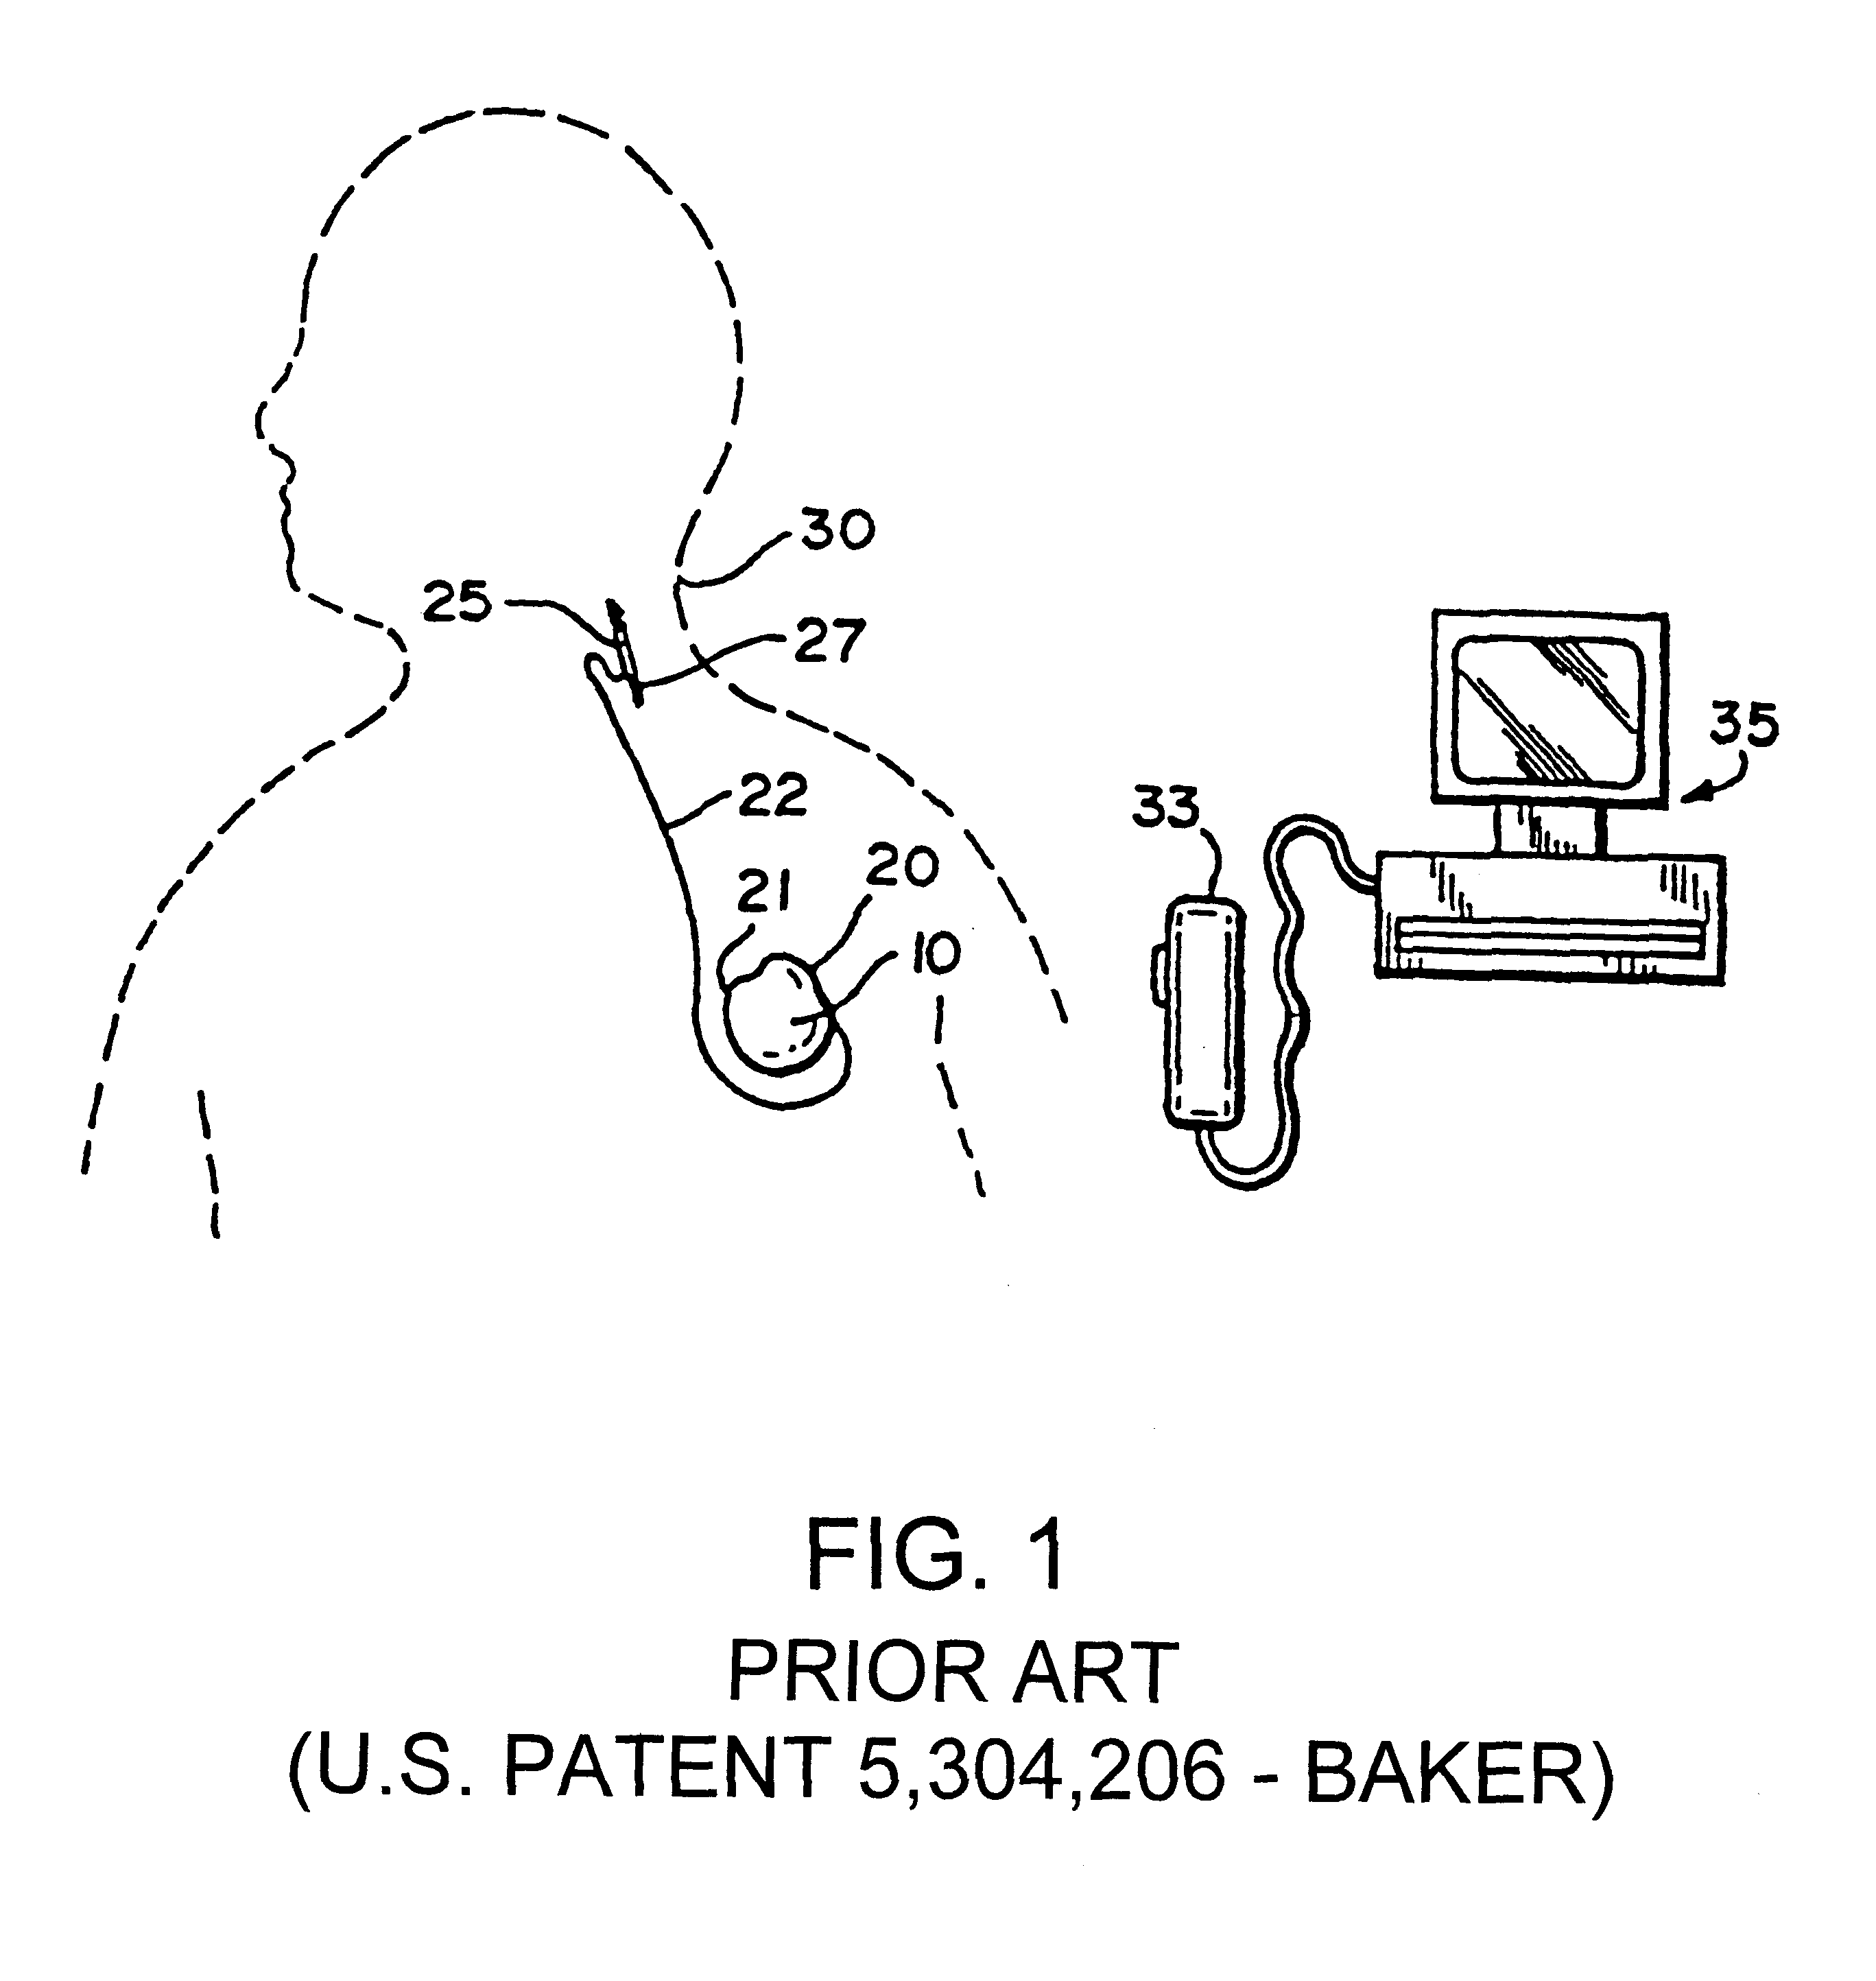 Apparatus and method for treatment of neurological and neuropsychiatric disorders using programmerless implantable pulse generator system